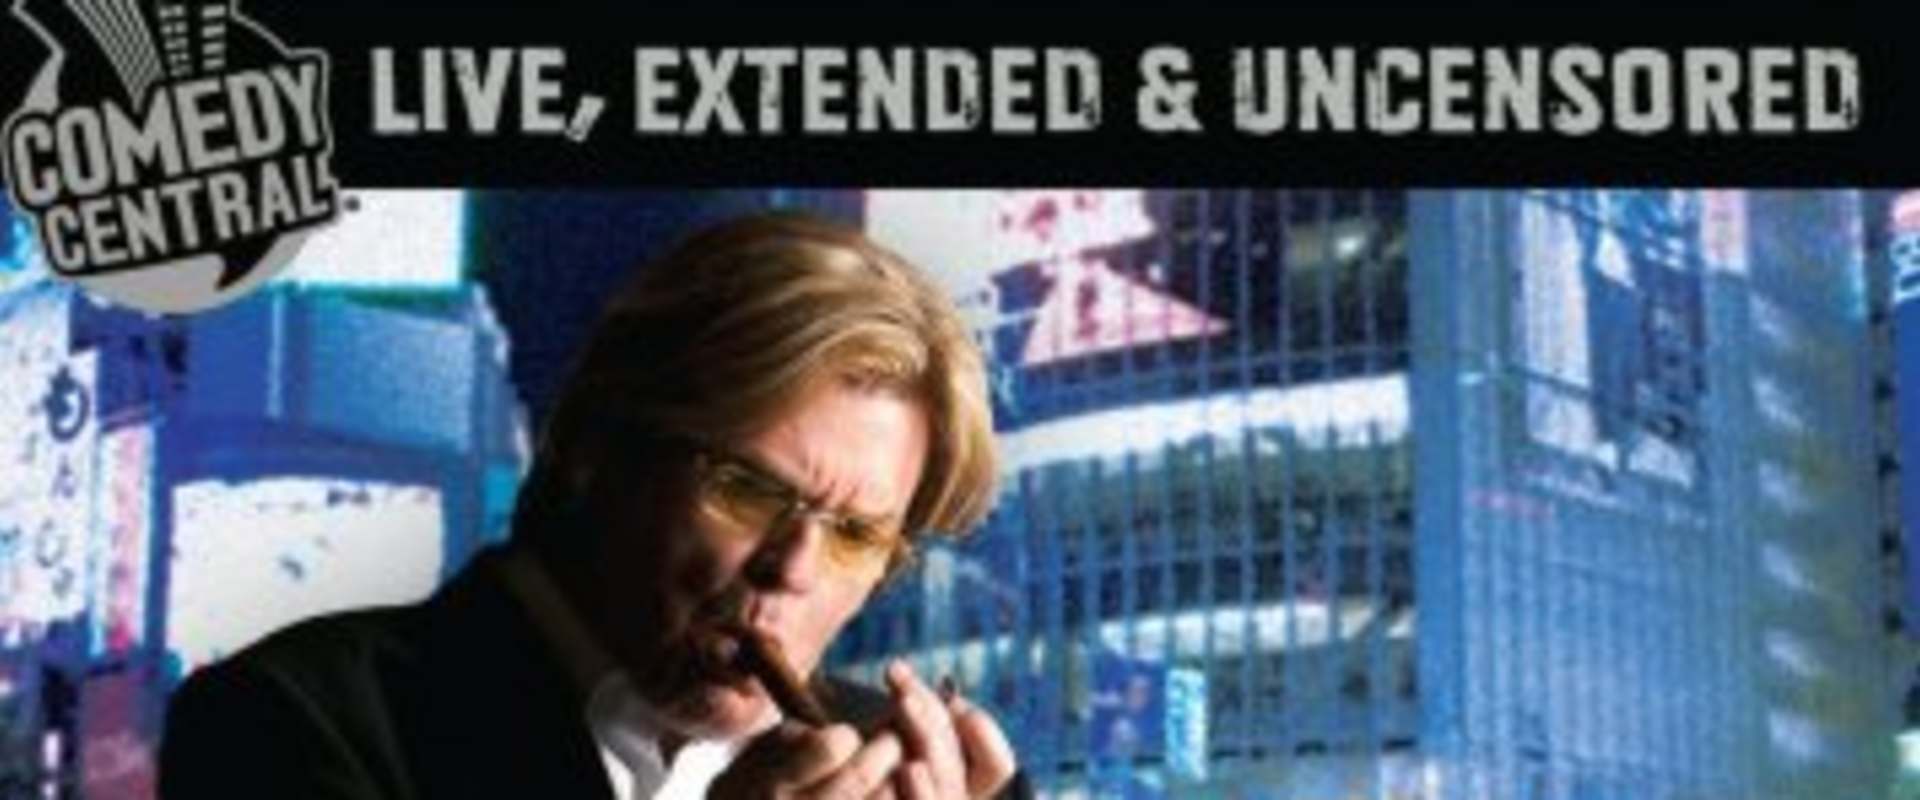 Ron White: They Call Me Tater Salad background 1